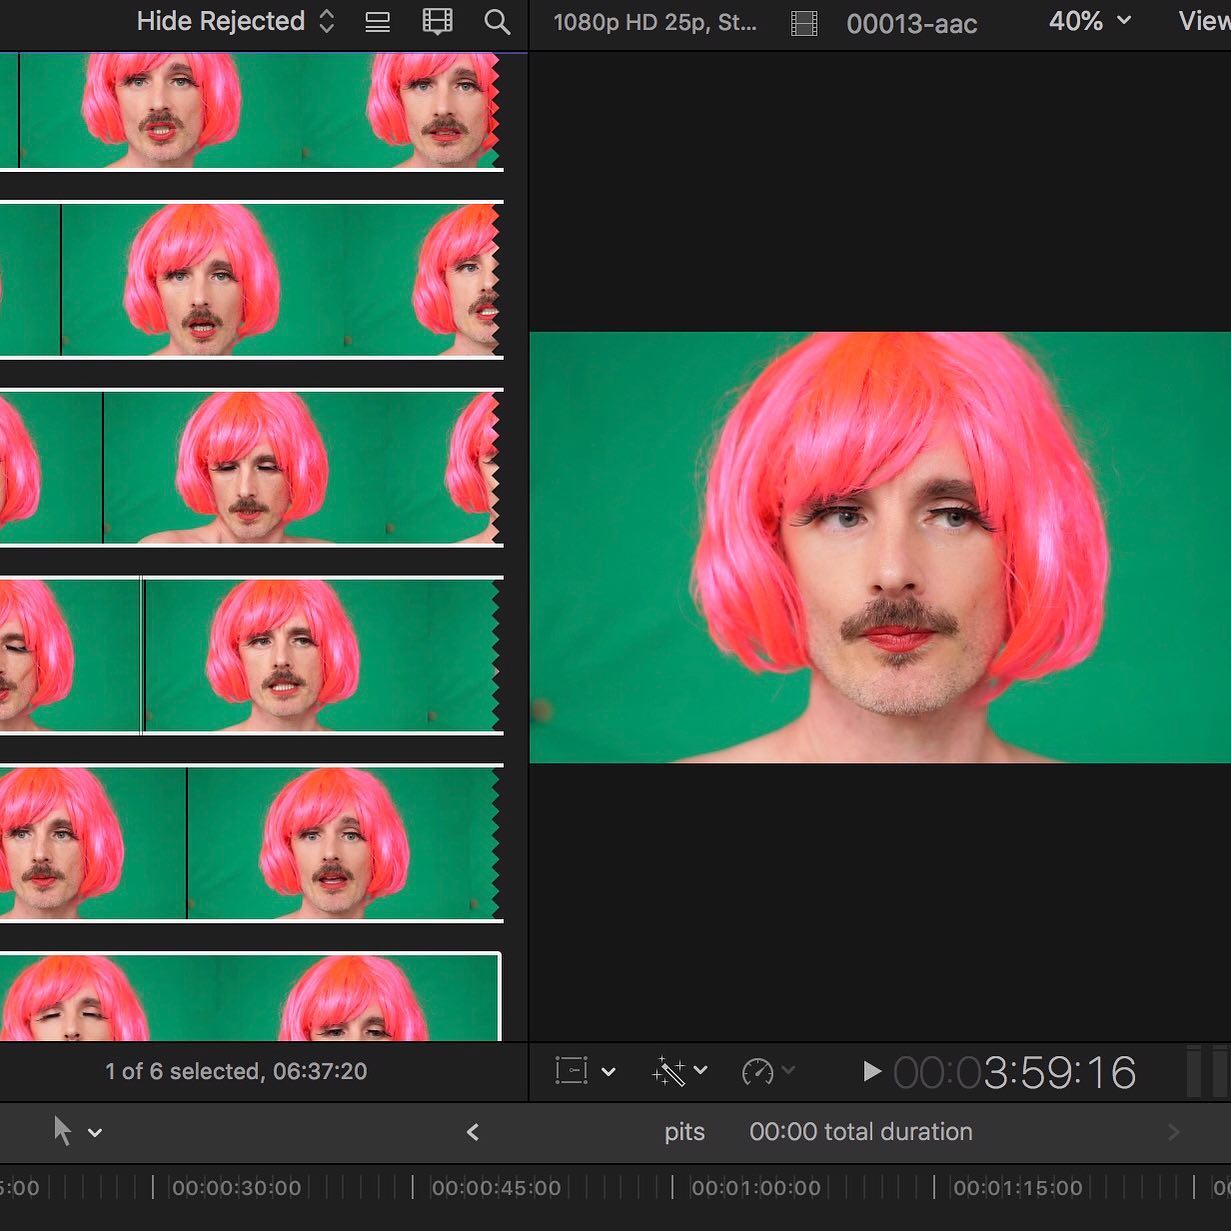 Work process screenshot of Dickie Beau wearing a bright pink wig, appearing multiple times on screen in different slides, looking into the camera mid-speech.